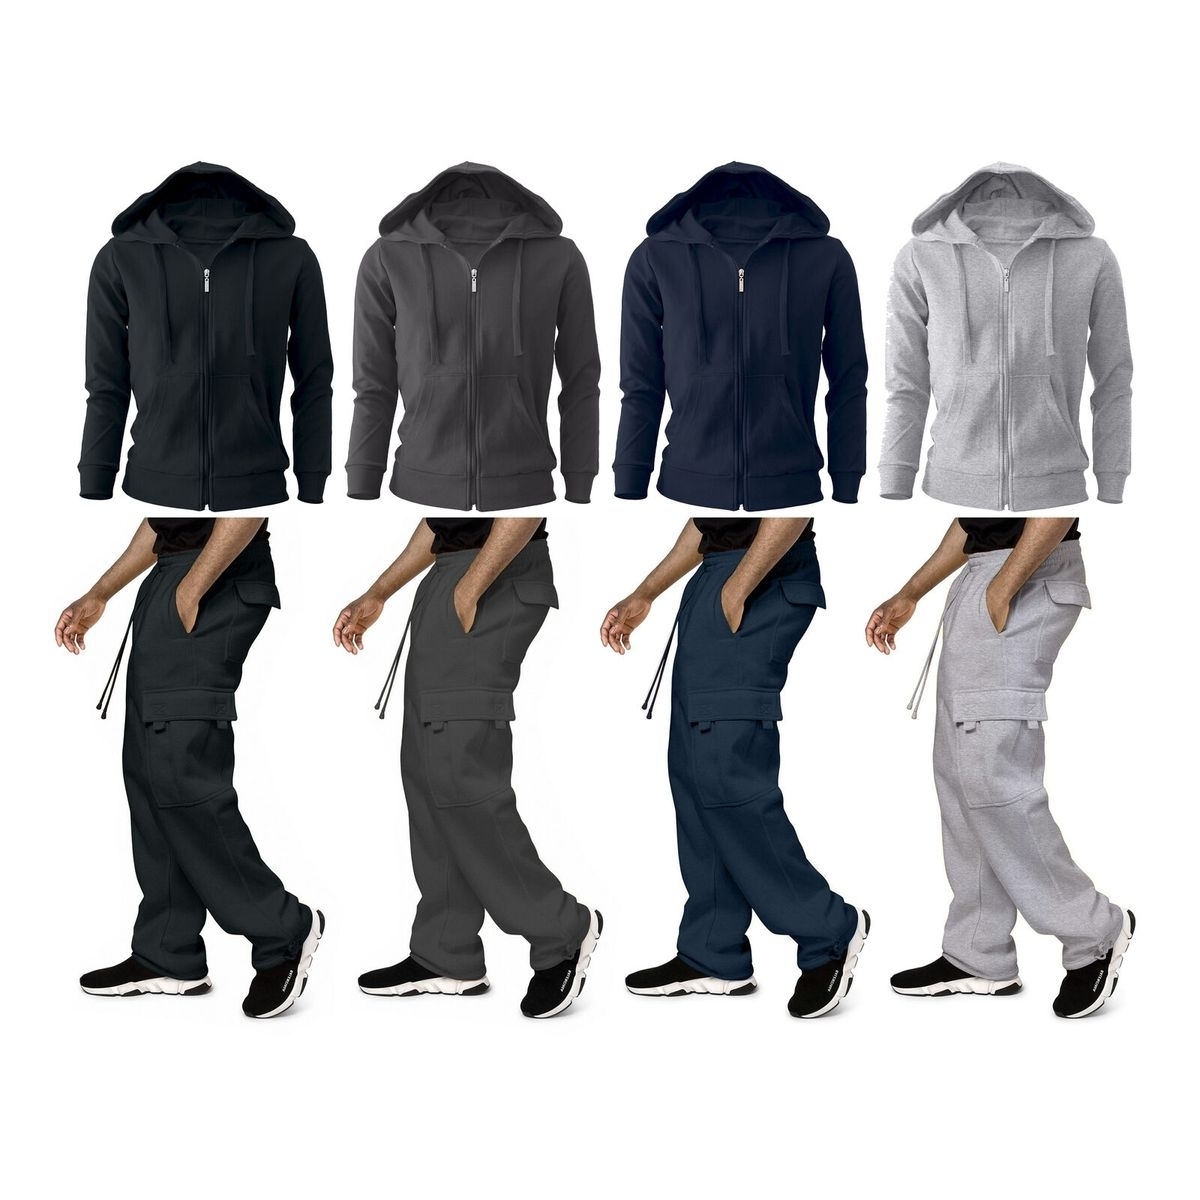 Men's Big & Tall Winter Warm Athletic Active Cozy Fleece Lined Multi-Pocket Full Zip Up Cargo Tracksuit - Navy, X-large